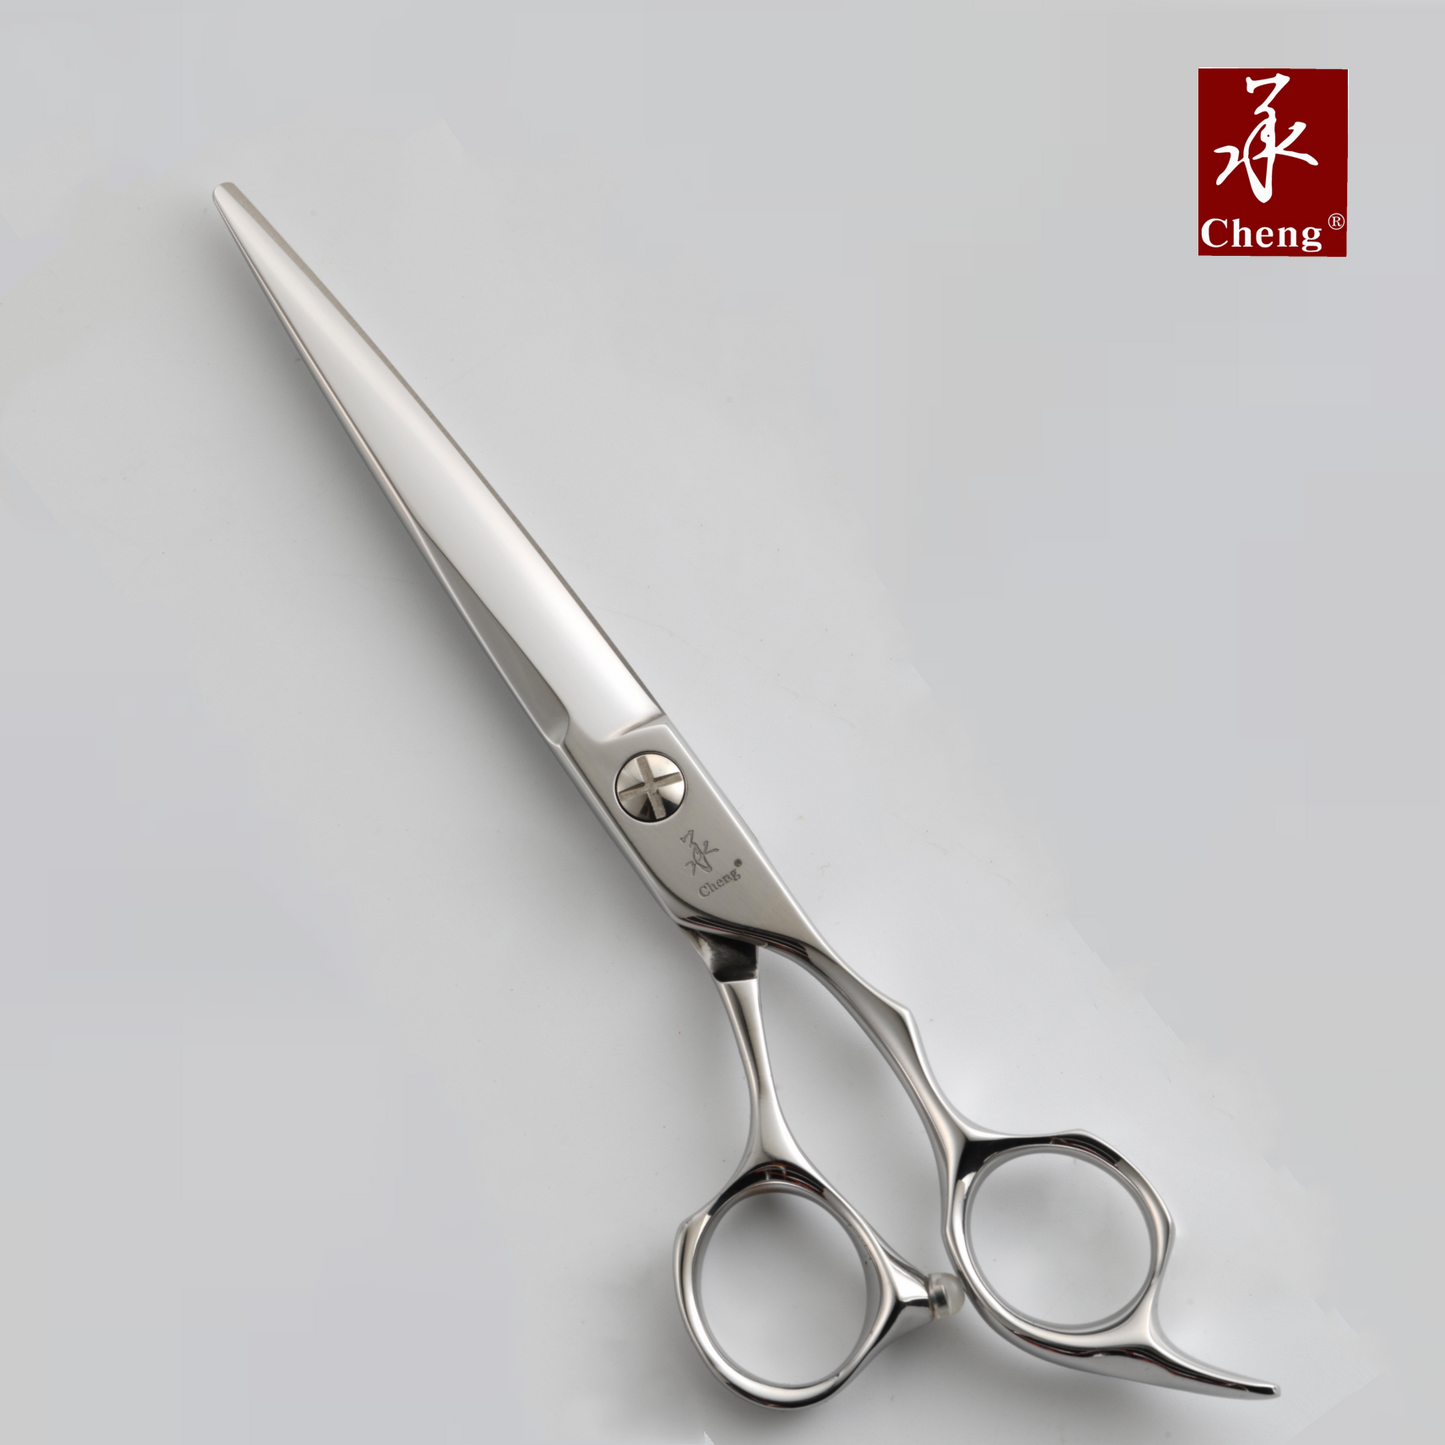 AAD-627T Hair Thinning Scissors 6.0 Inch 27T About=20%~25%